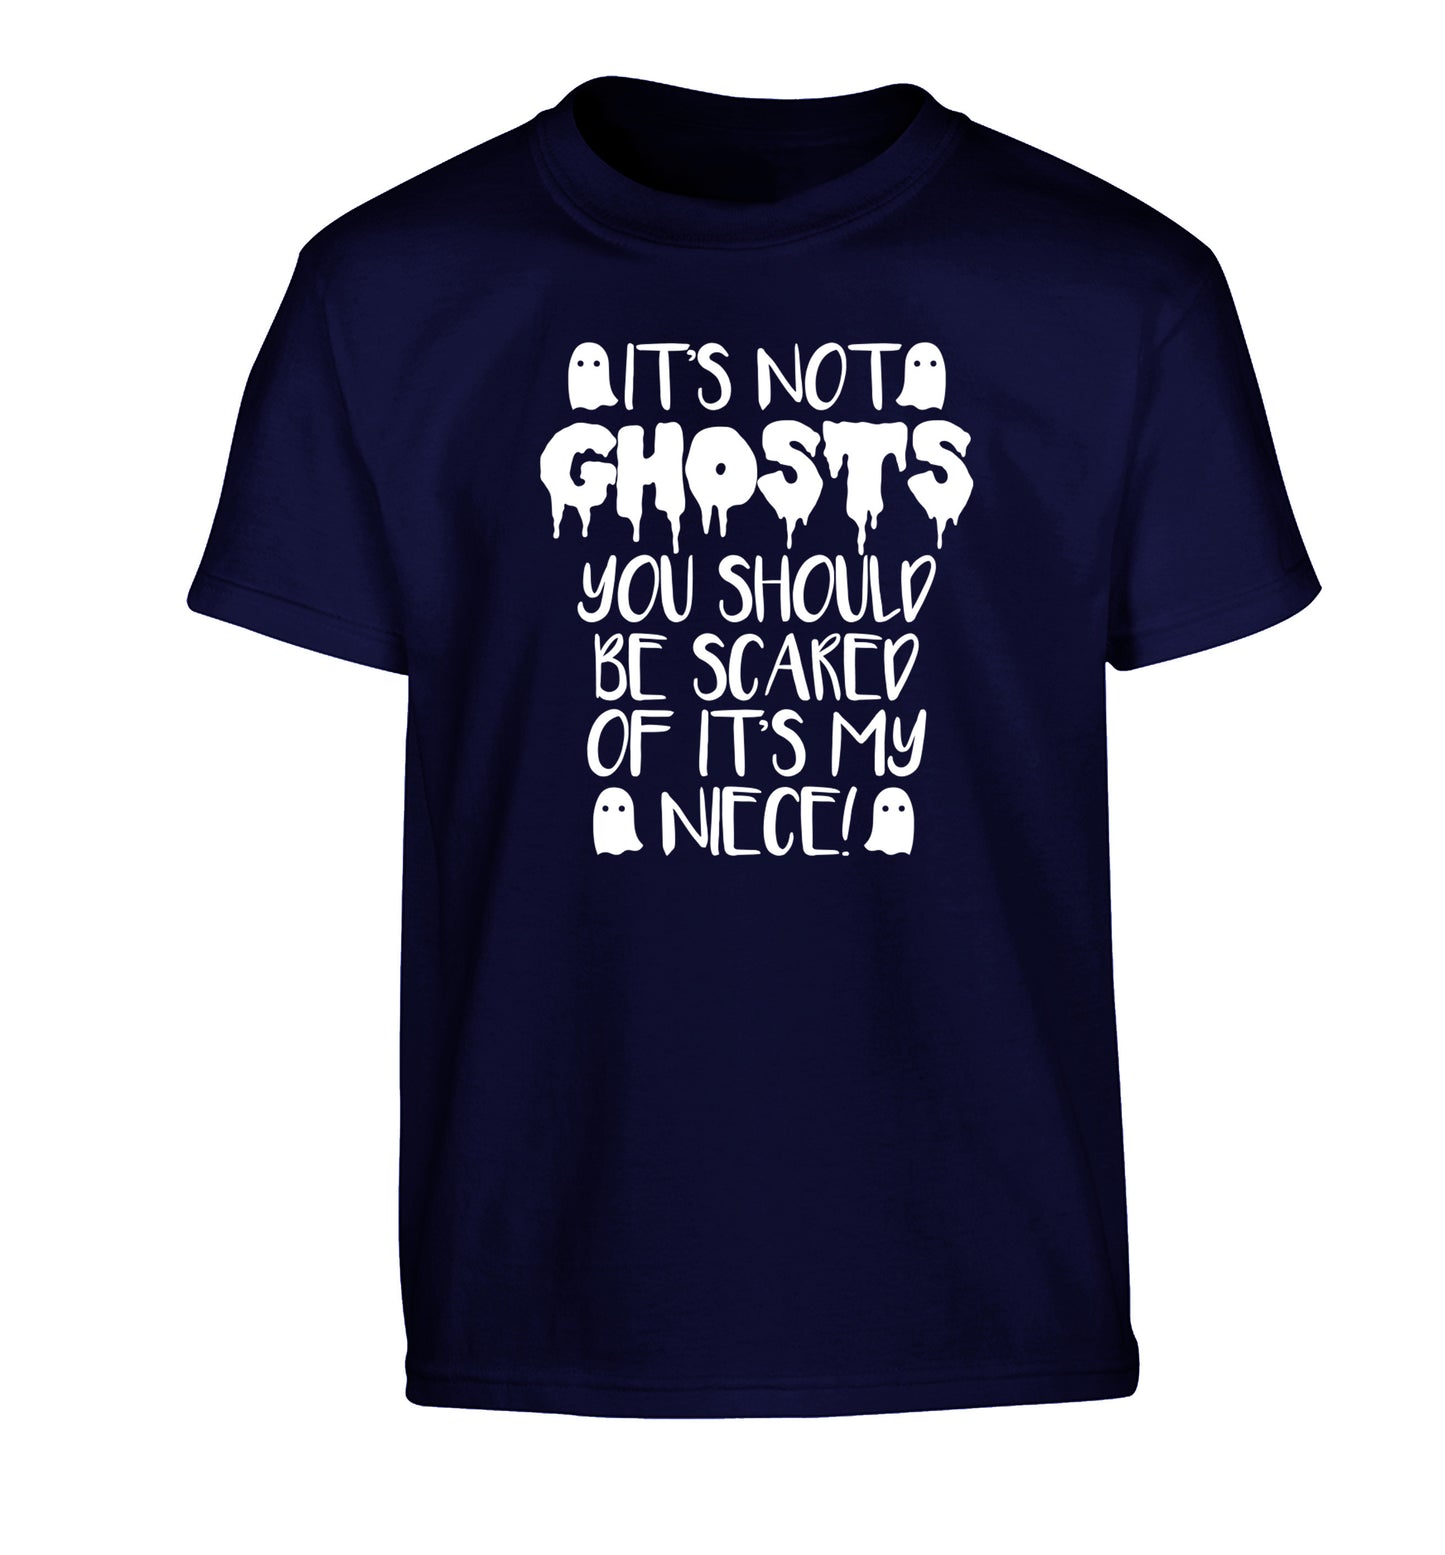 It's not ghosts you should be scared of it's my niece! Children's navy Tshirt 12-14 Years